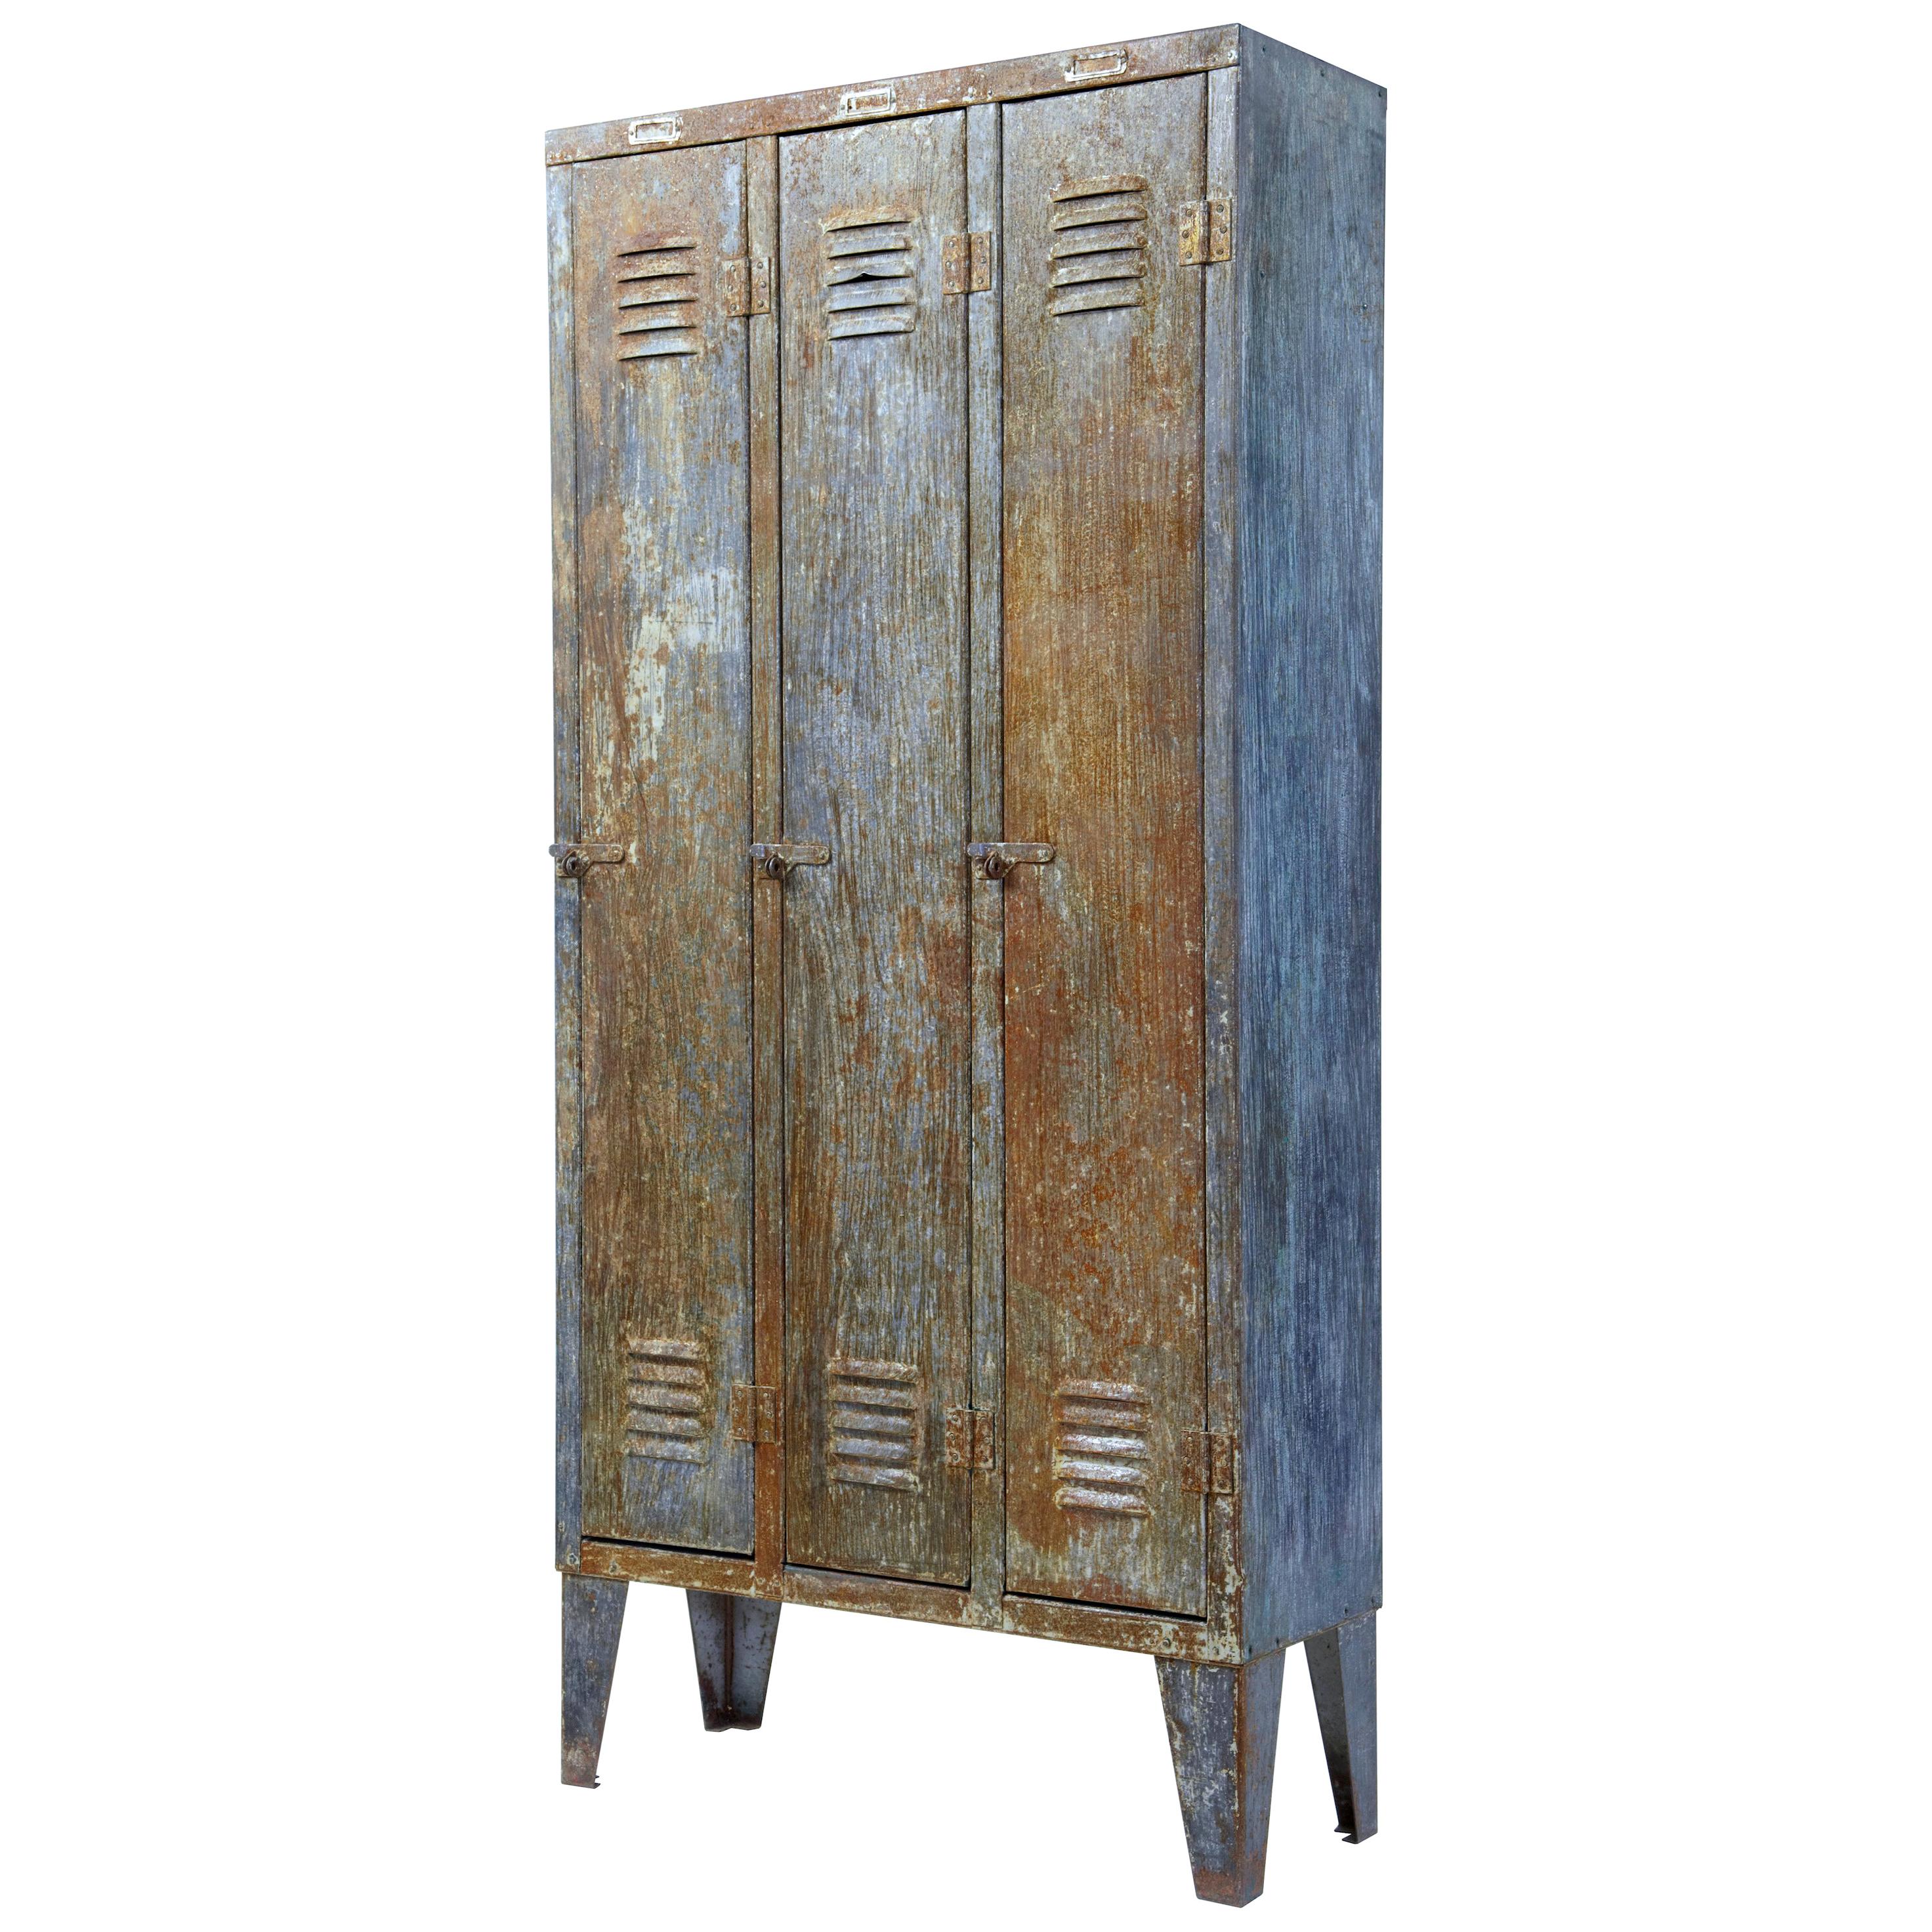 Mid-20th Century Distressed Industrial Cabinet